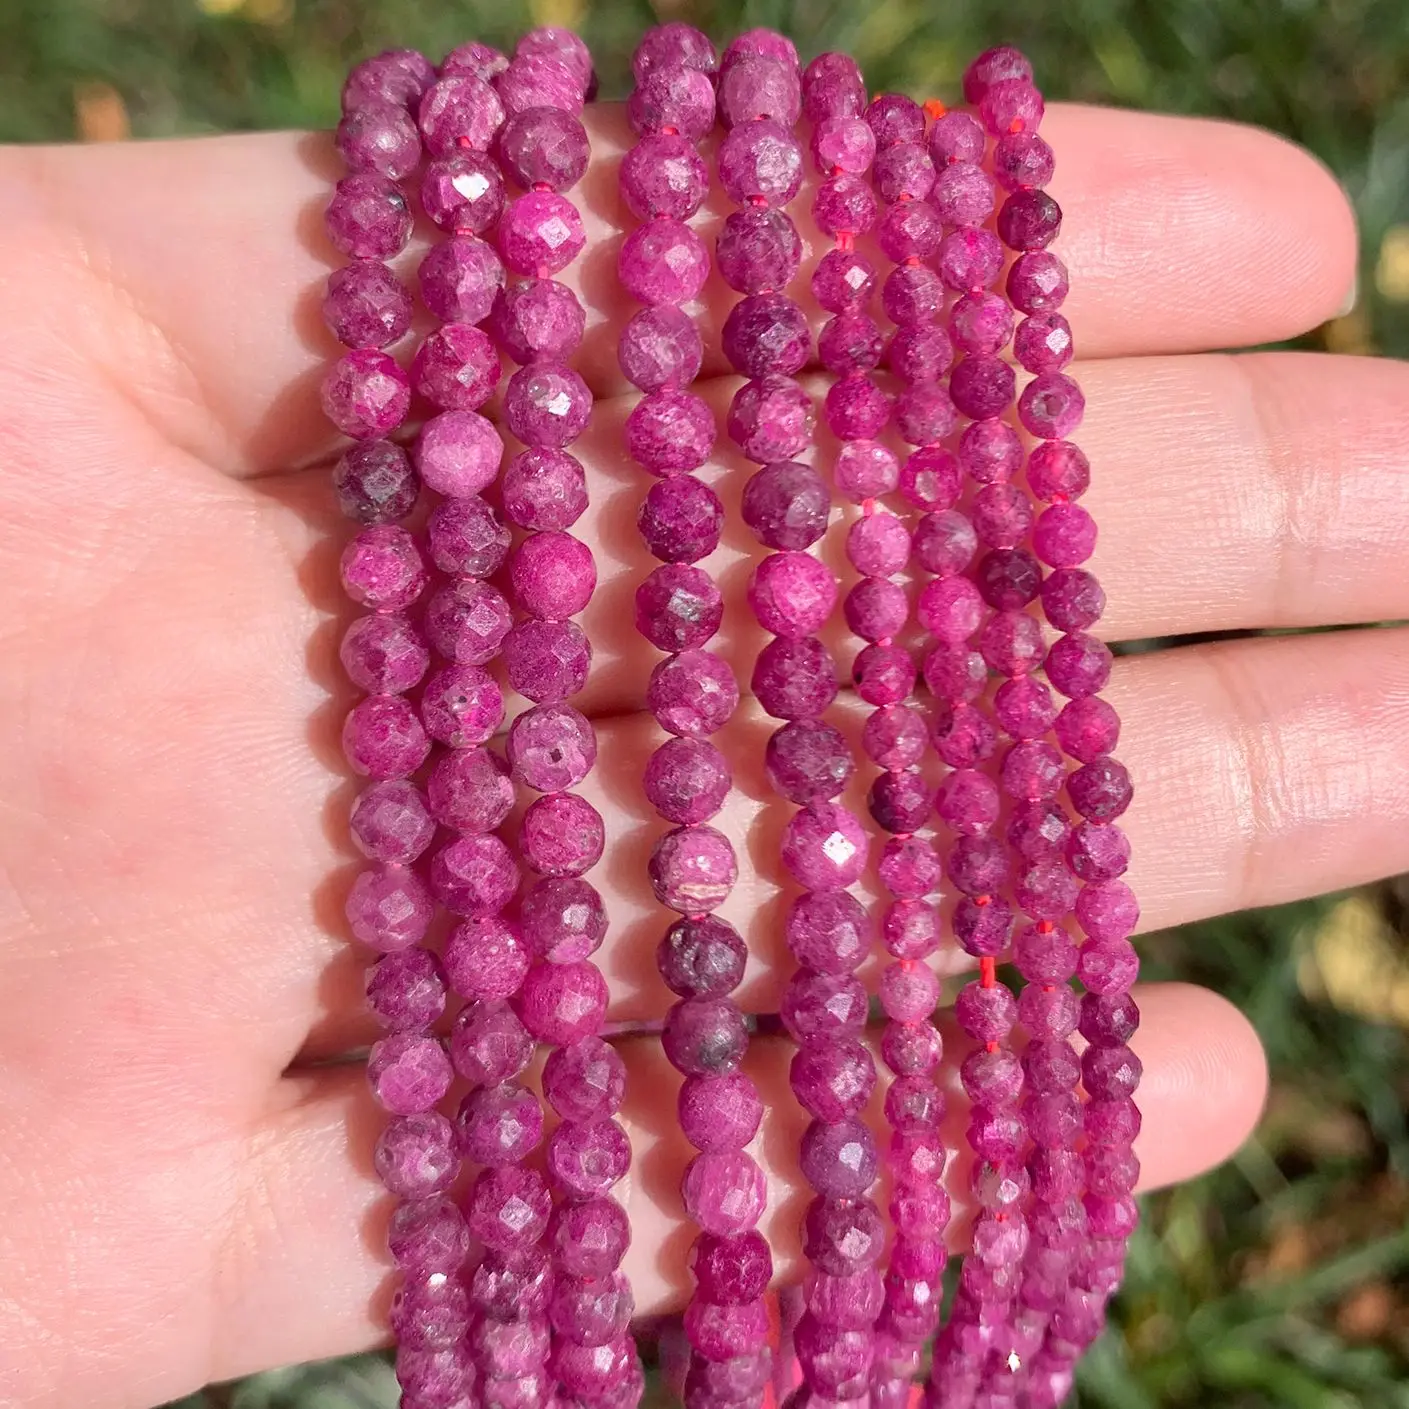 

2 3 4mm Red Ruby Natural Gemstone Faceted Small Round Loose Spacer Beads For Jewelry Making Bracelet Necklace Wholesale 15inch